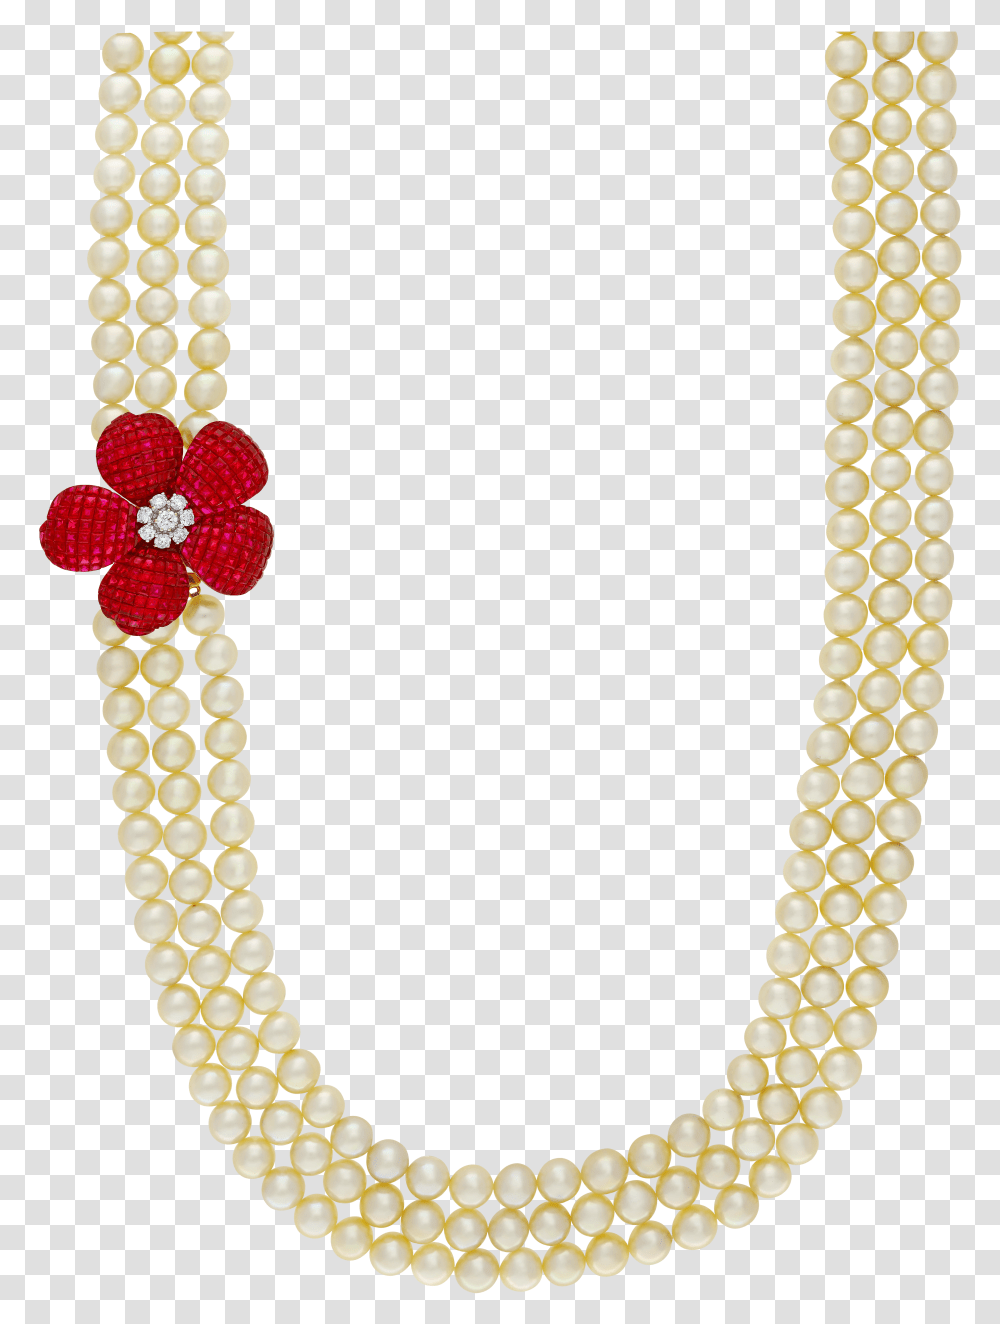 Necklace Necklace, Bead Necklace, Jewelry, Ornament, Accessories Transparent Png